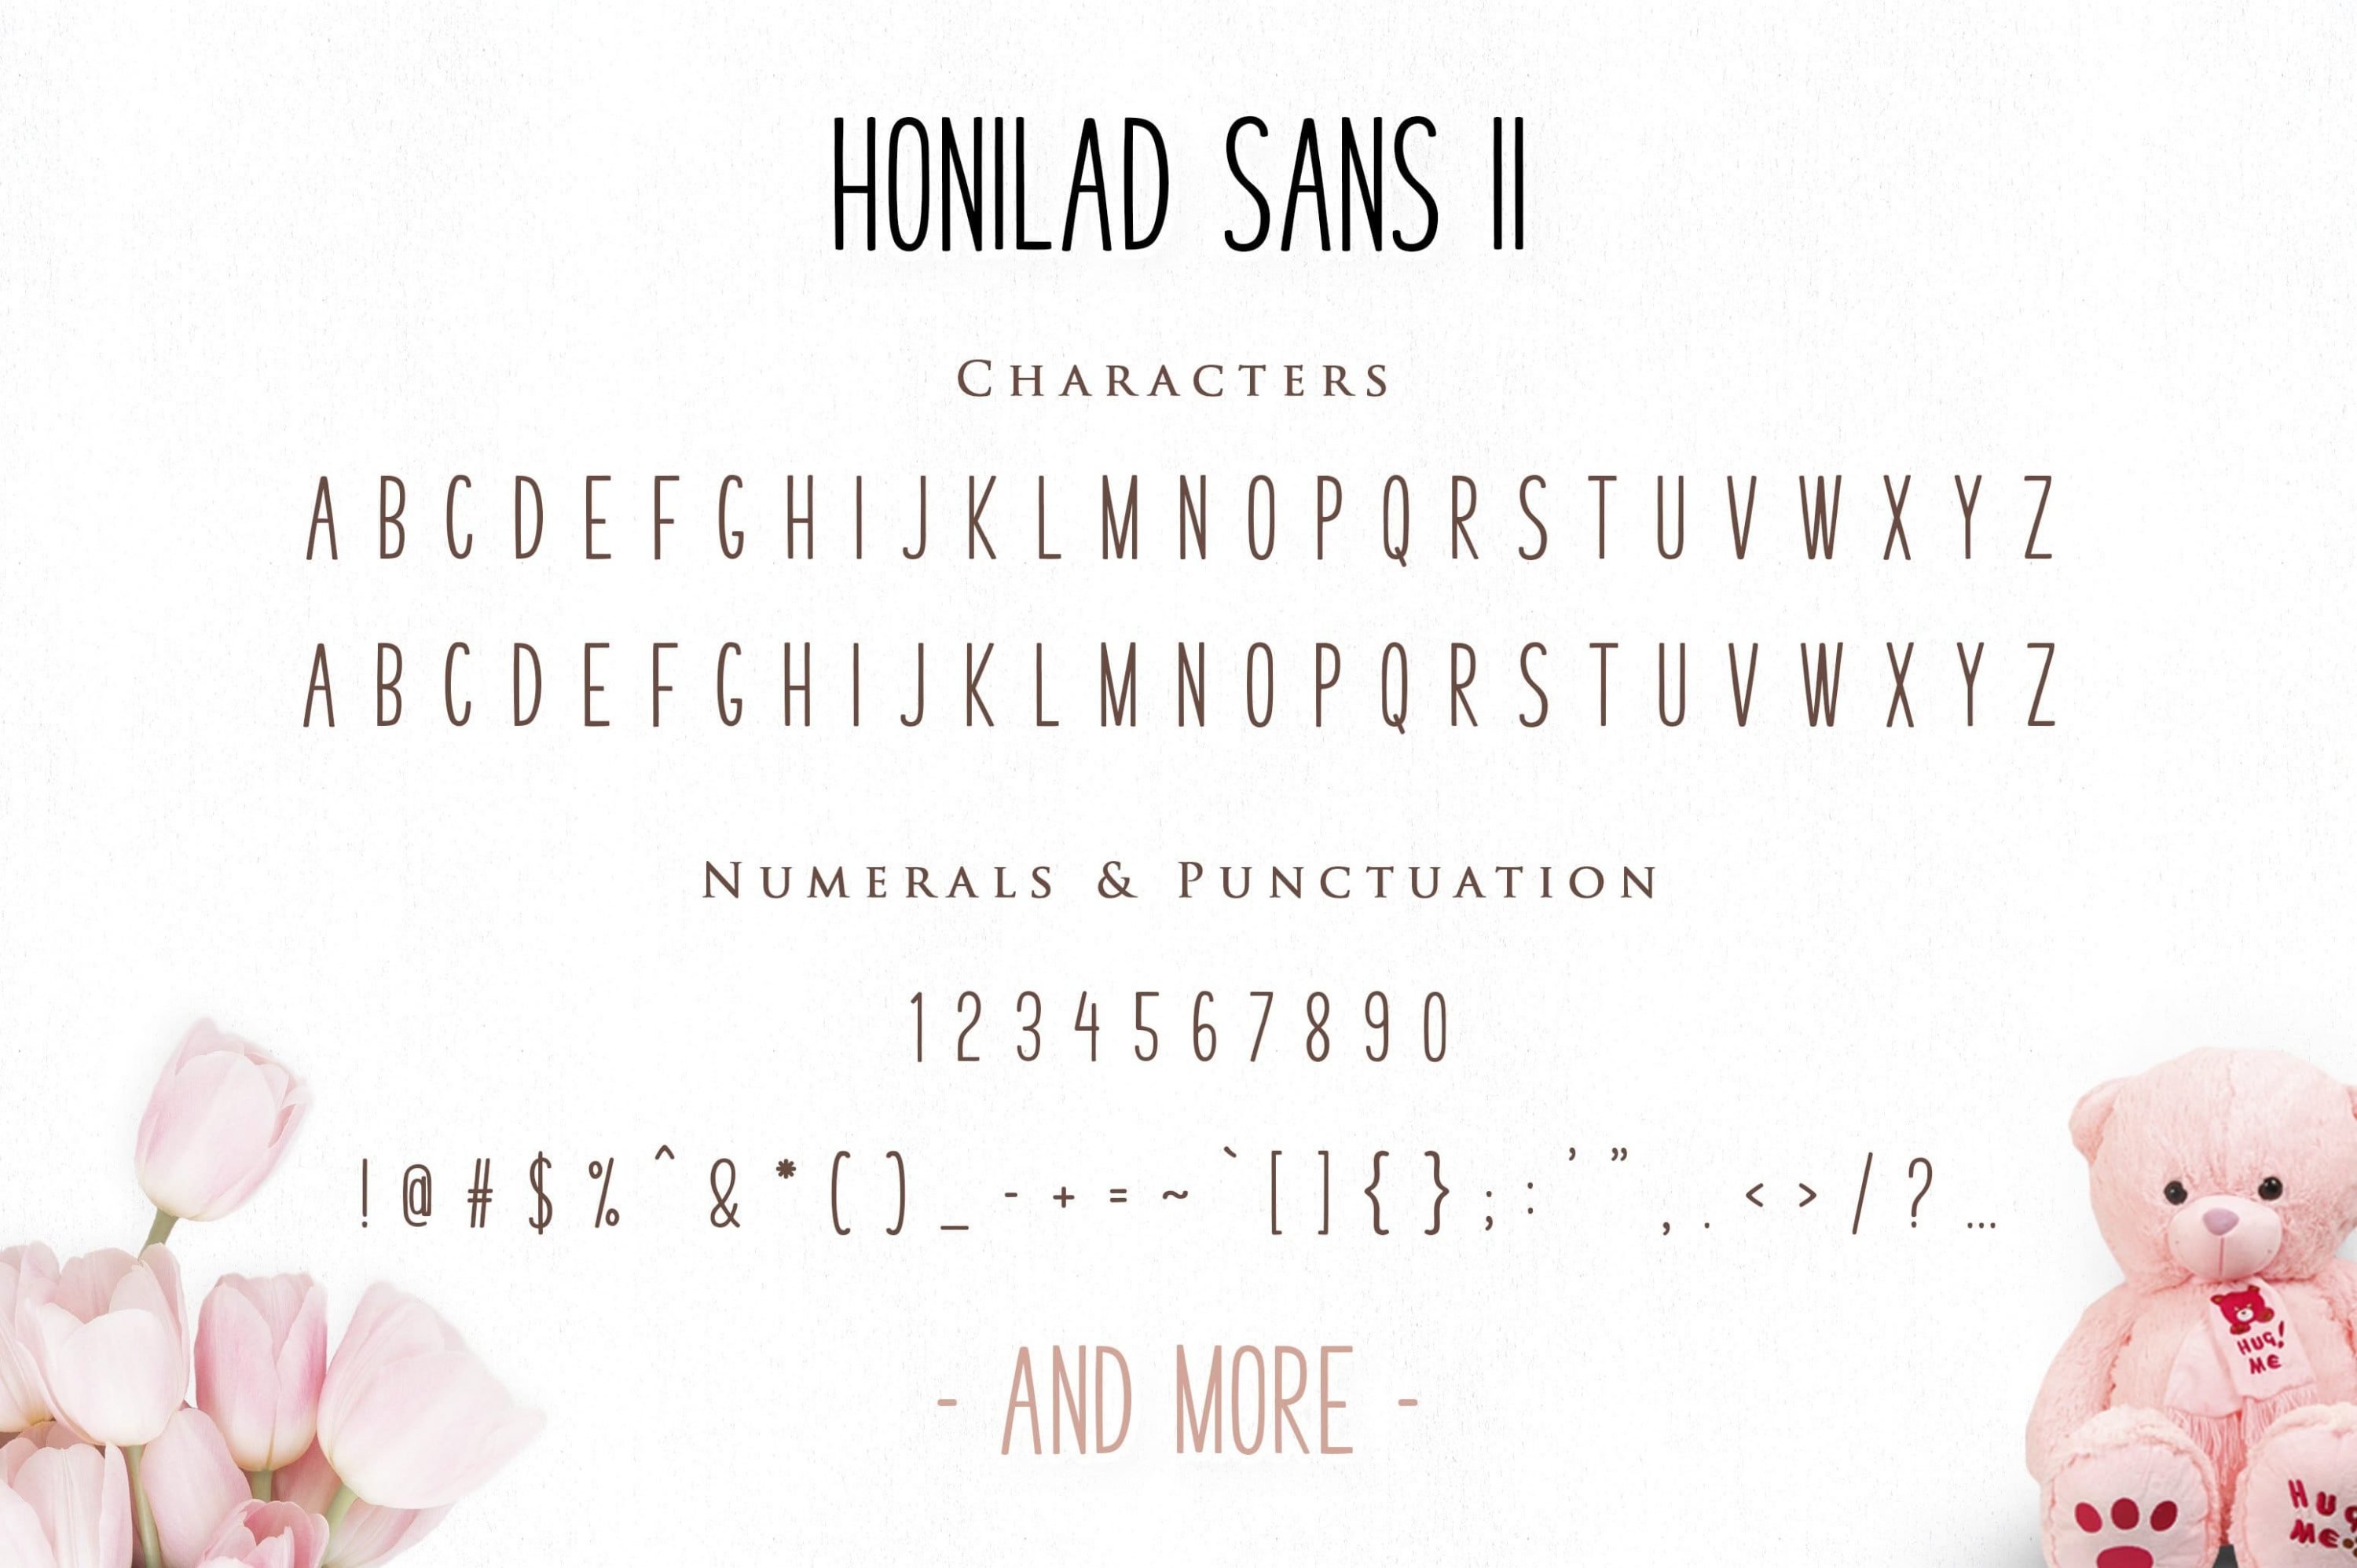 The main characters of Honilad font.